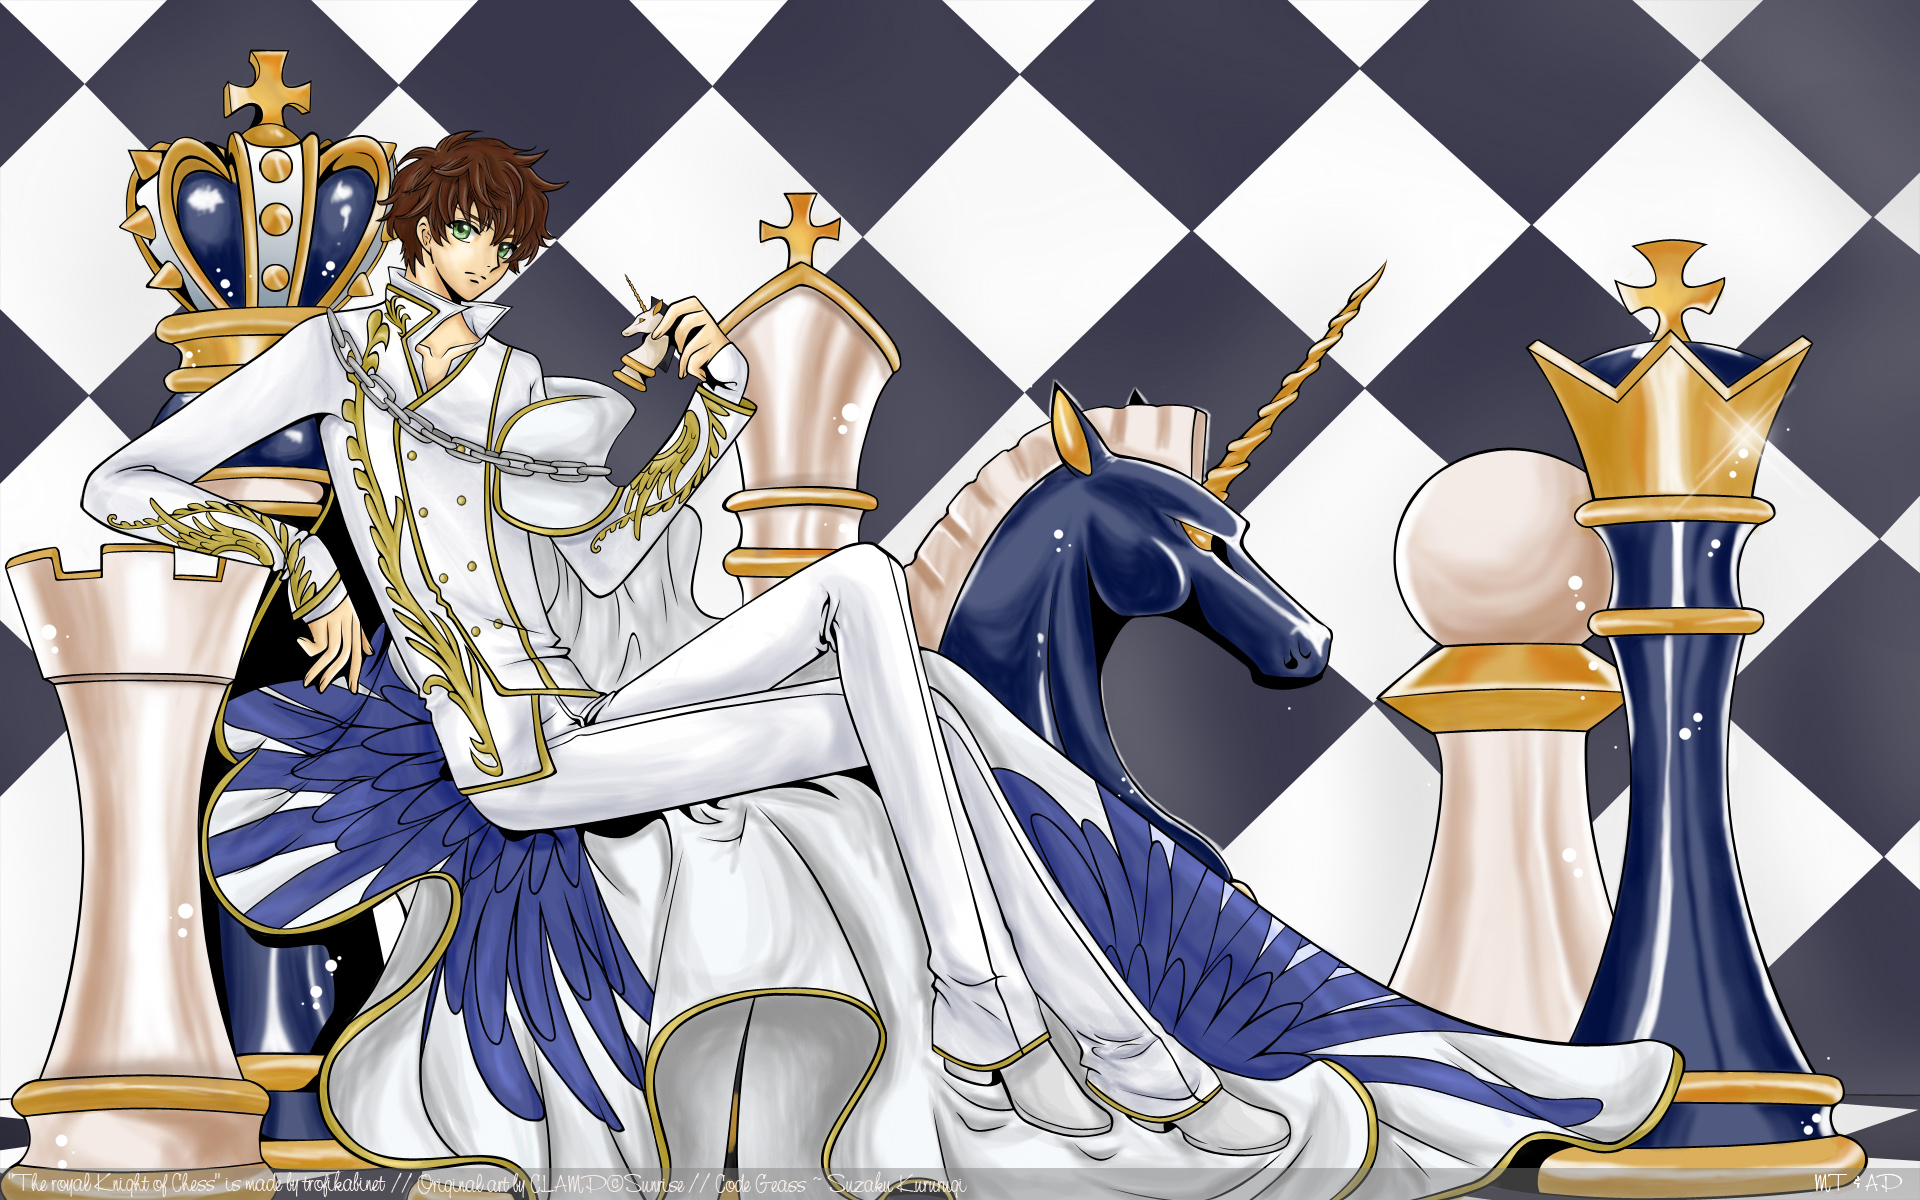 New Series Blitz Brings Chess to World of High Stakes Action Manga